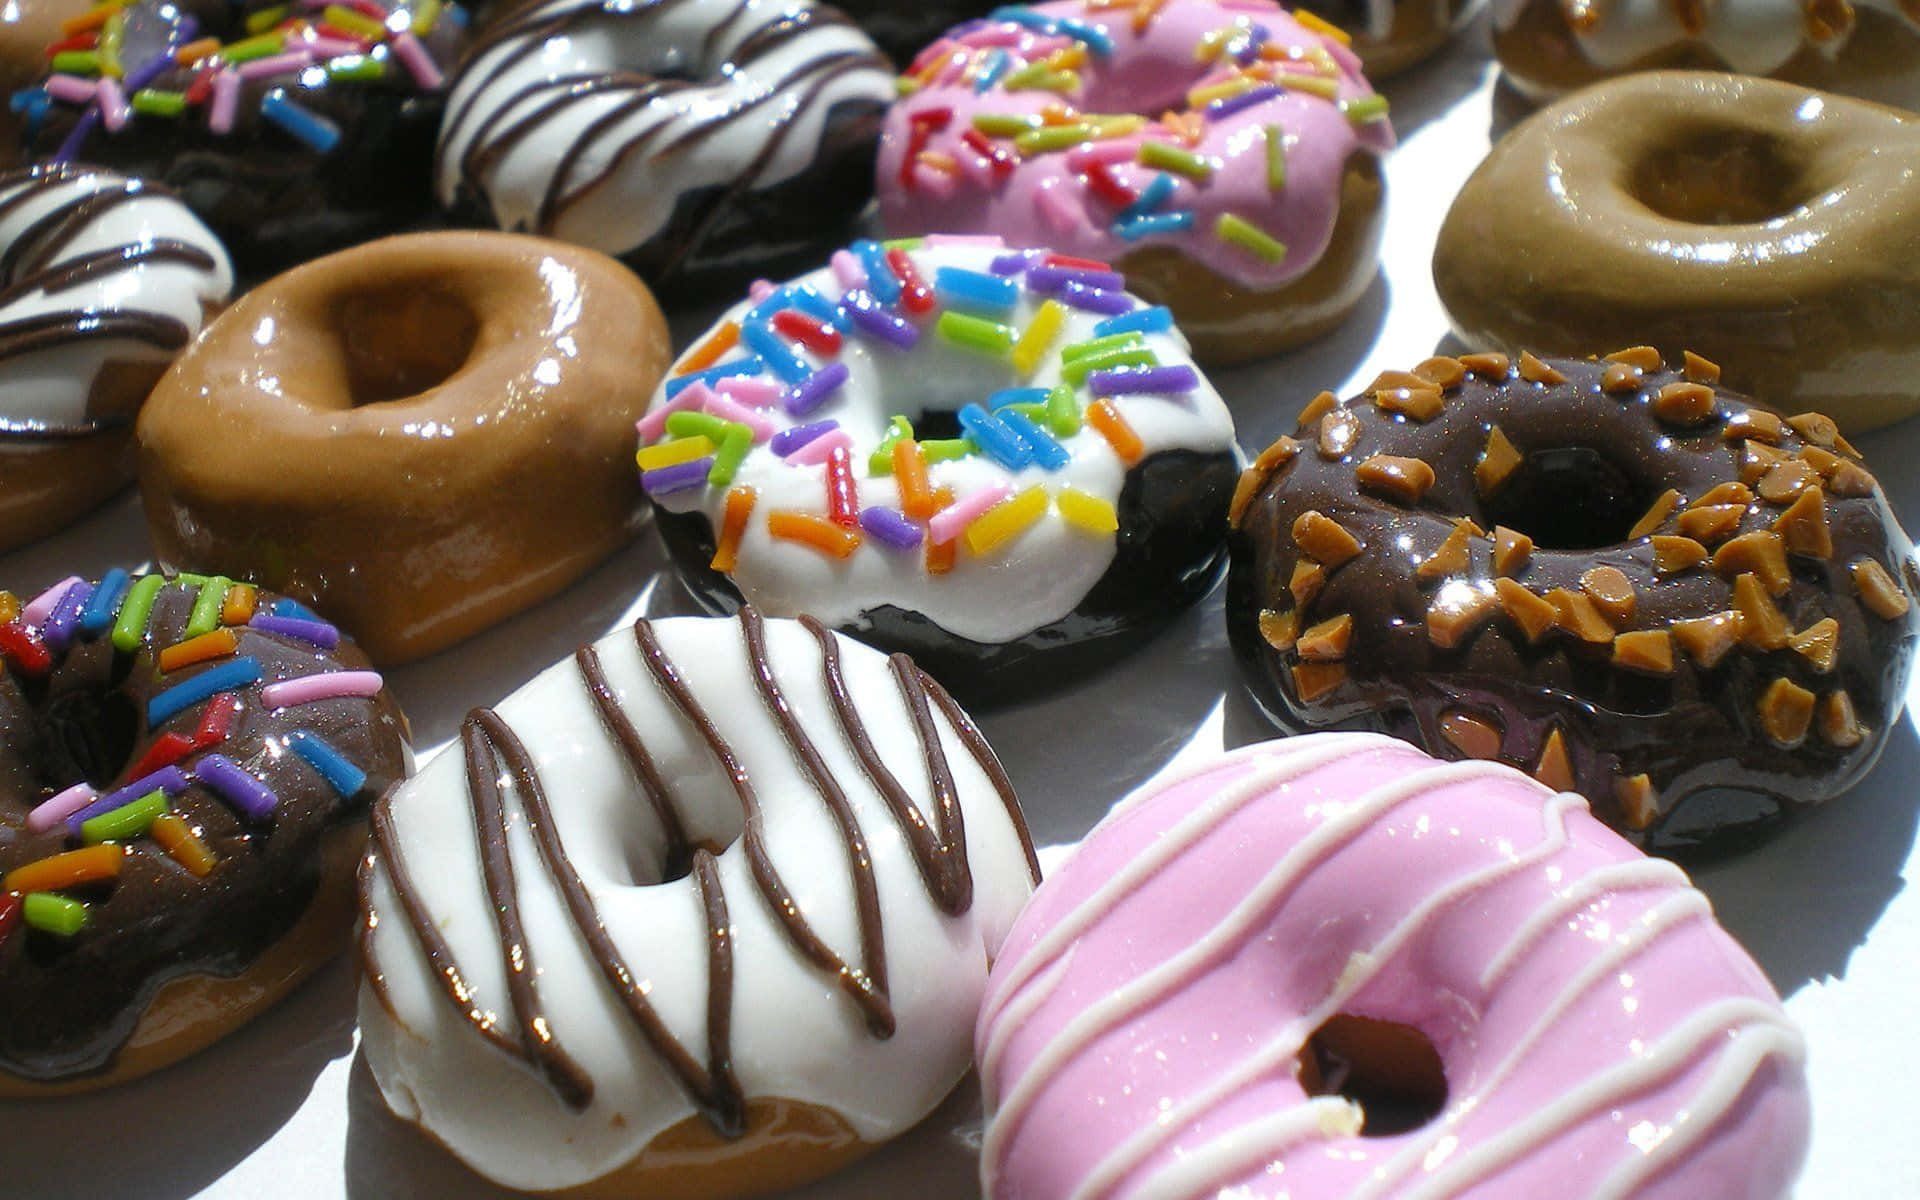 "Indulge in a Variety of Donuts!"